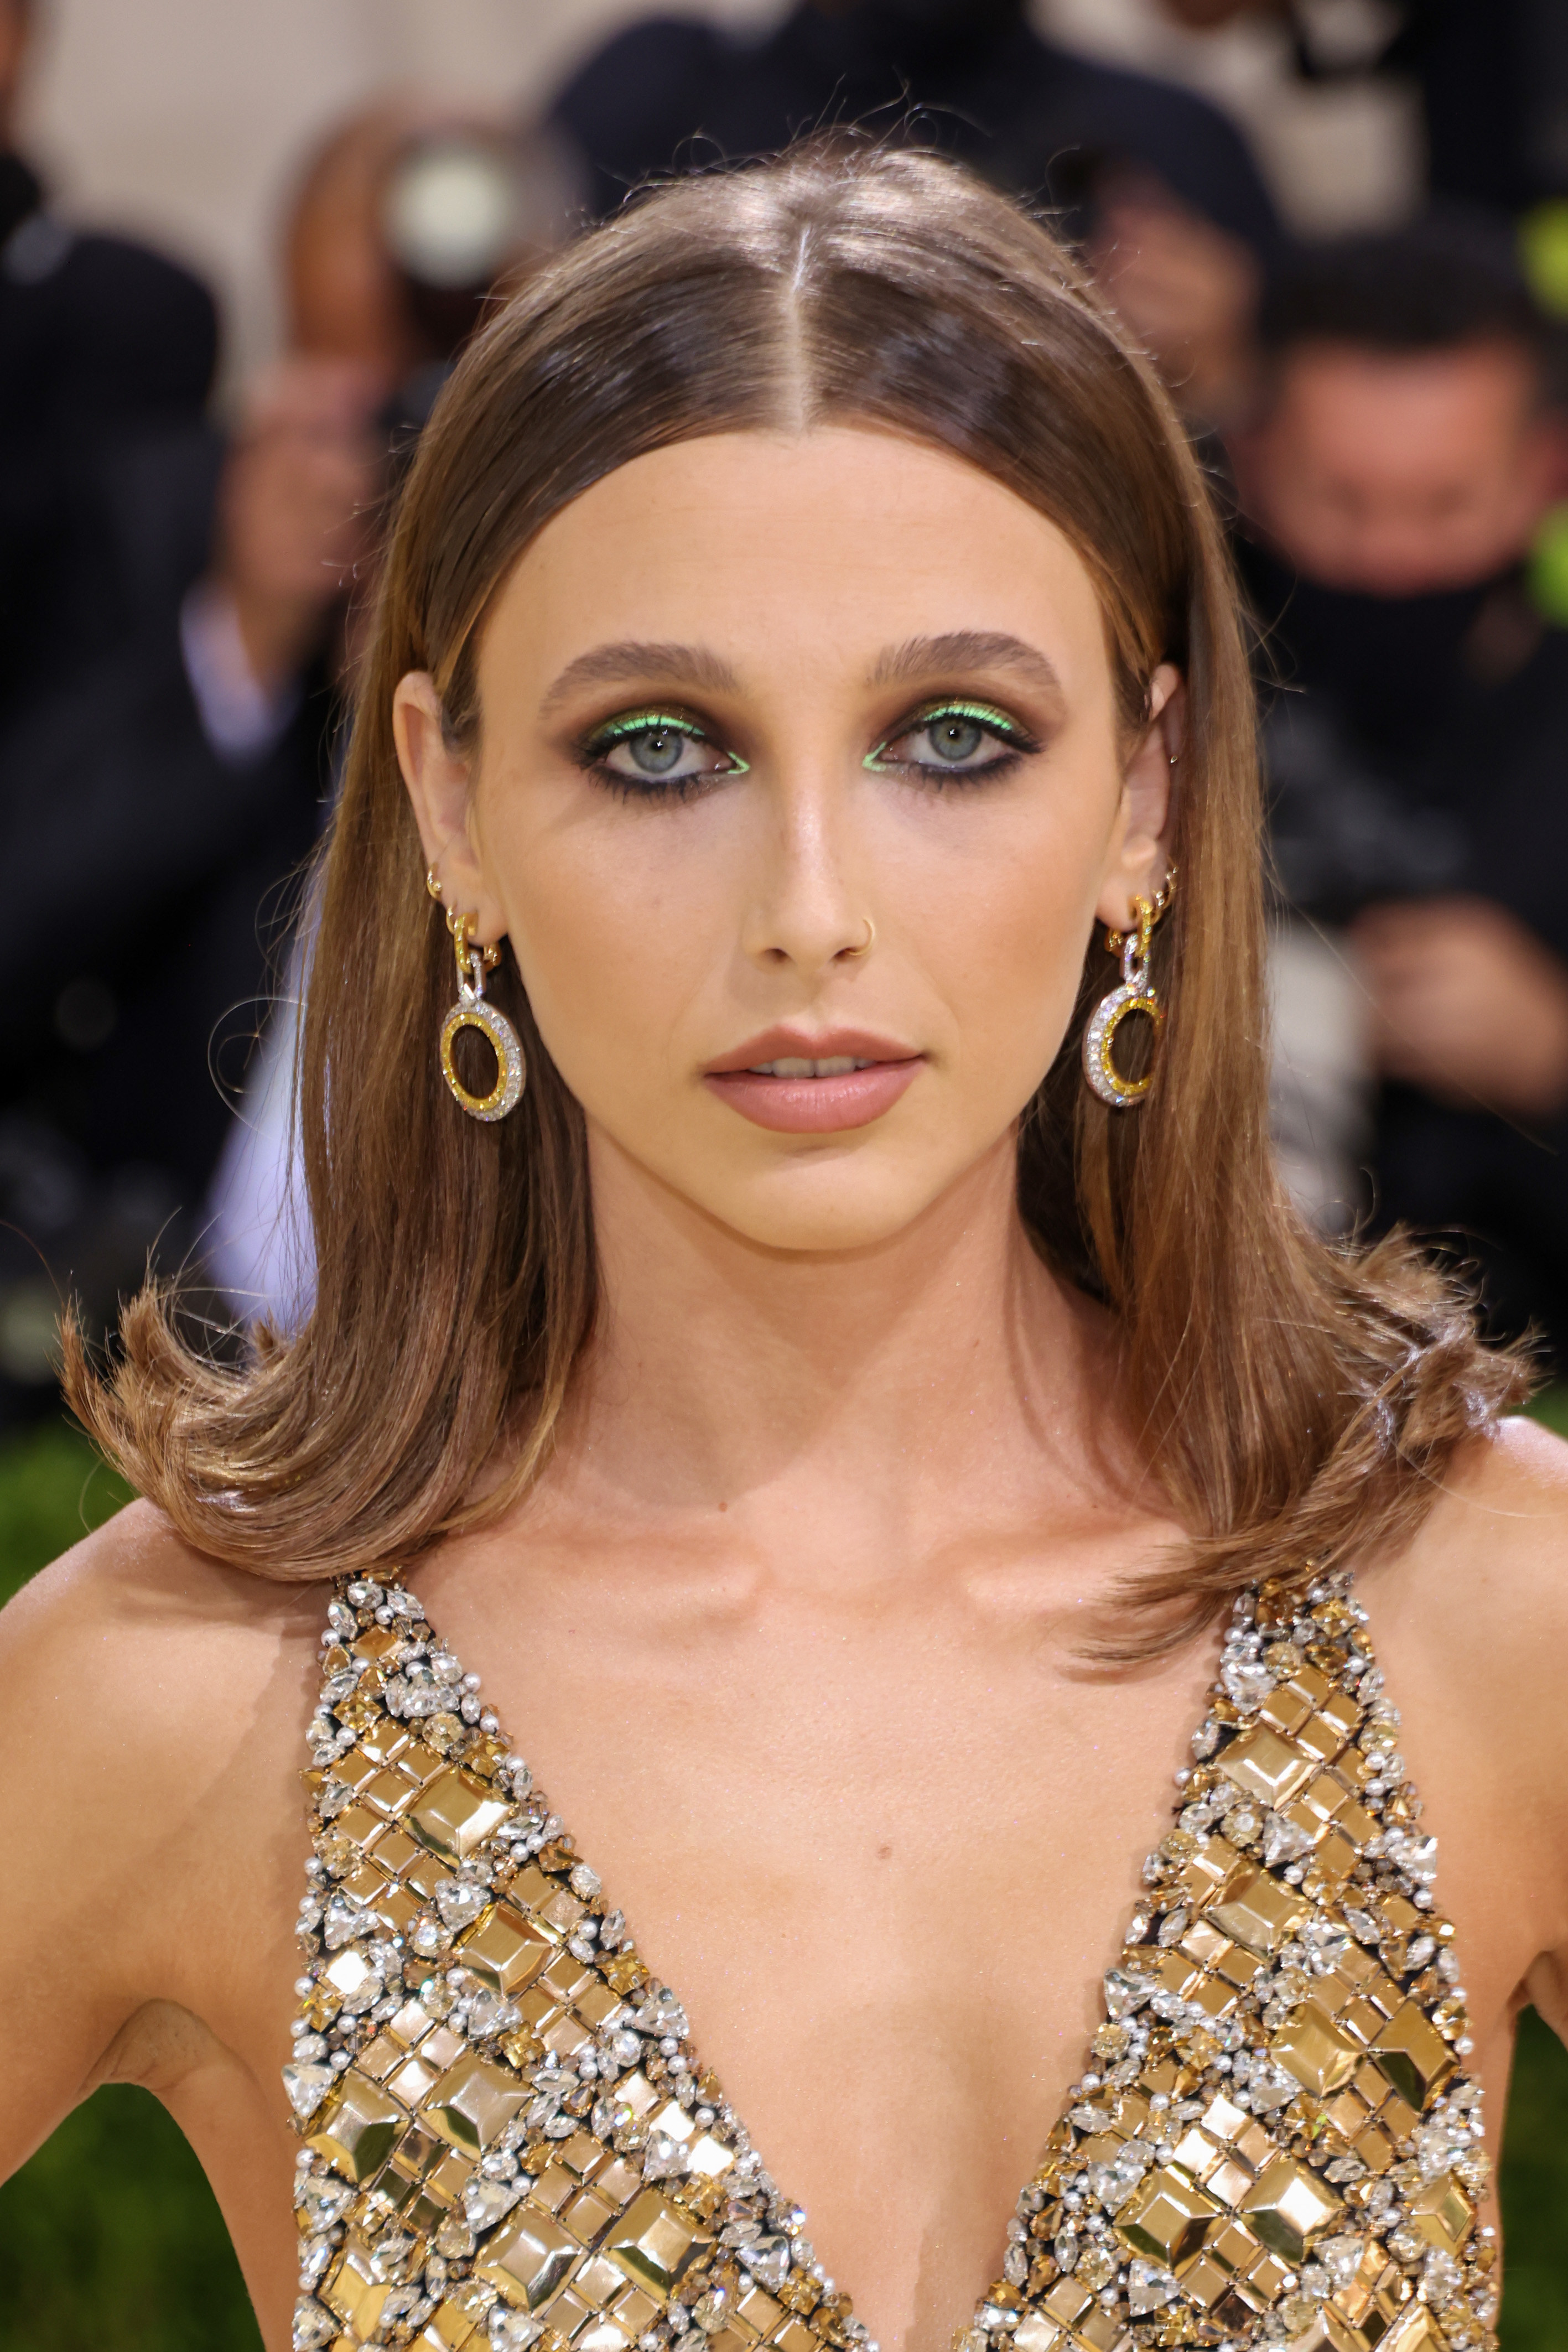 Influencer Emma Chamberlain Shines in Gold Louis Vuitton For Met